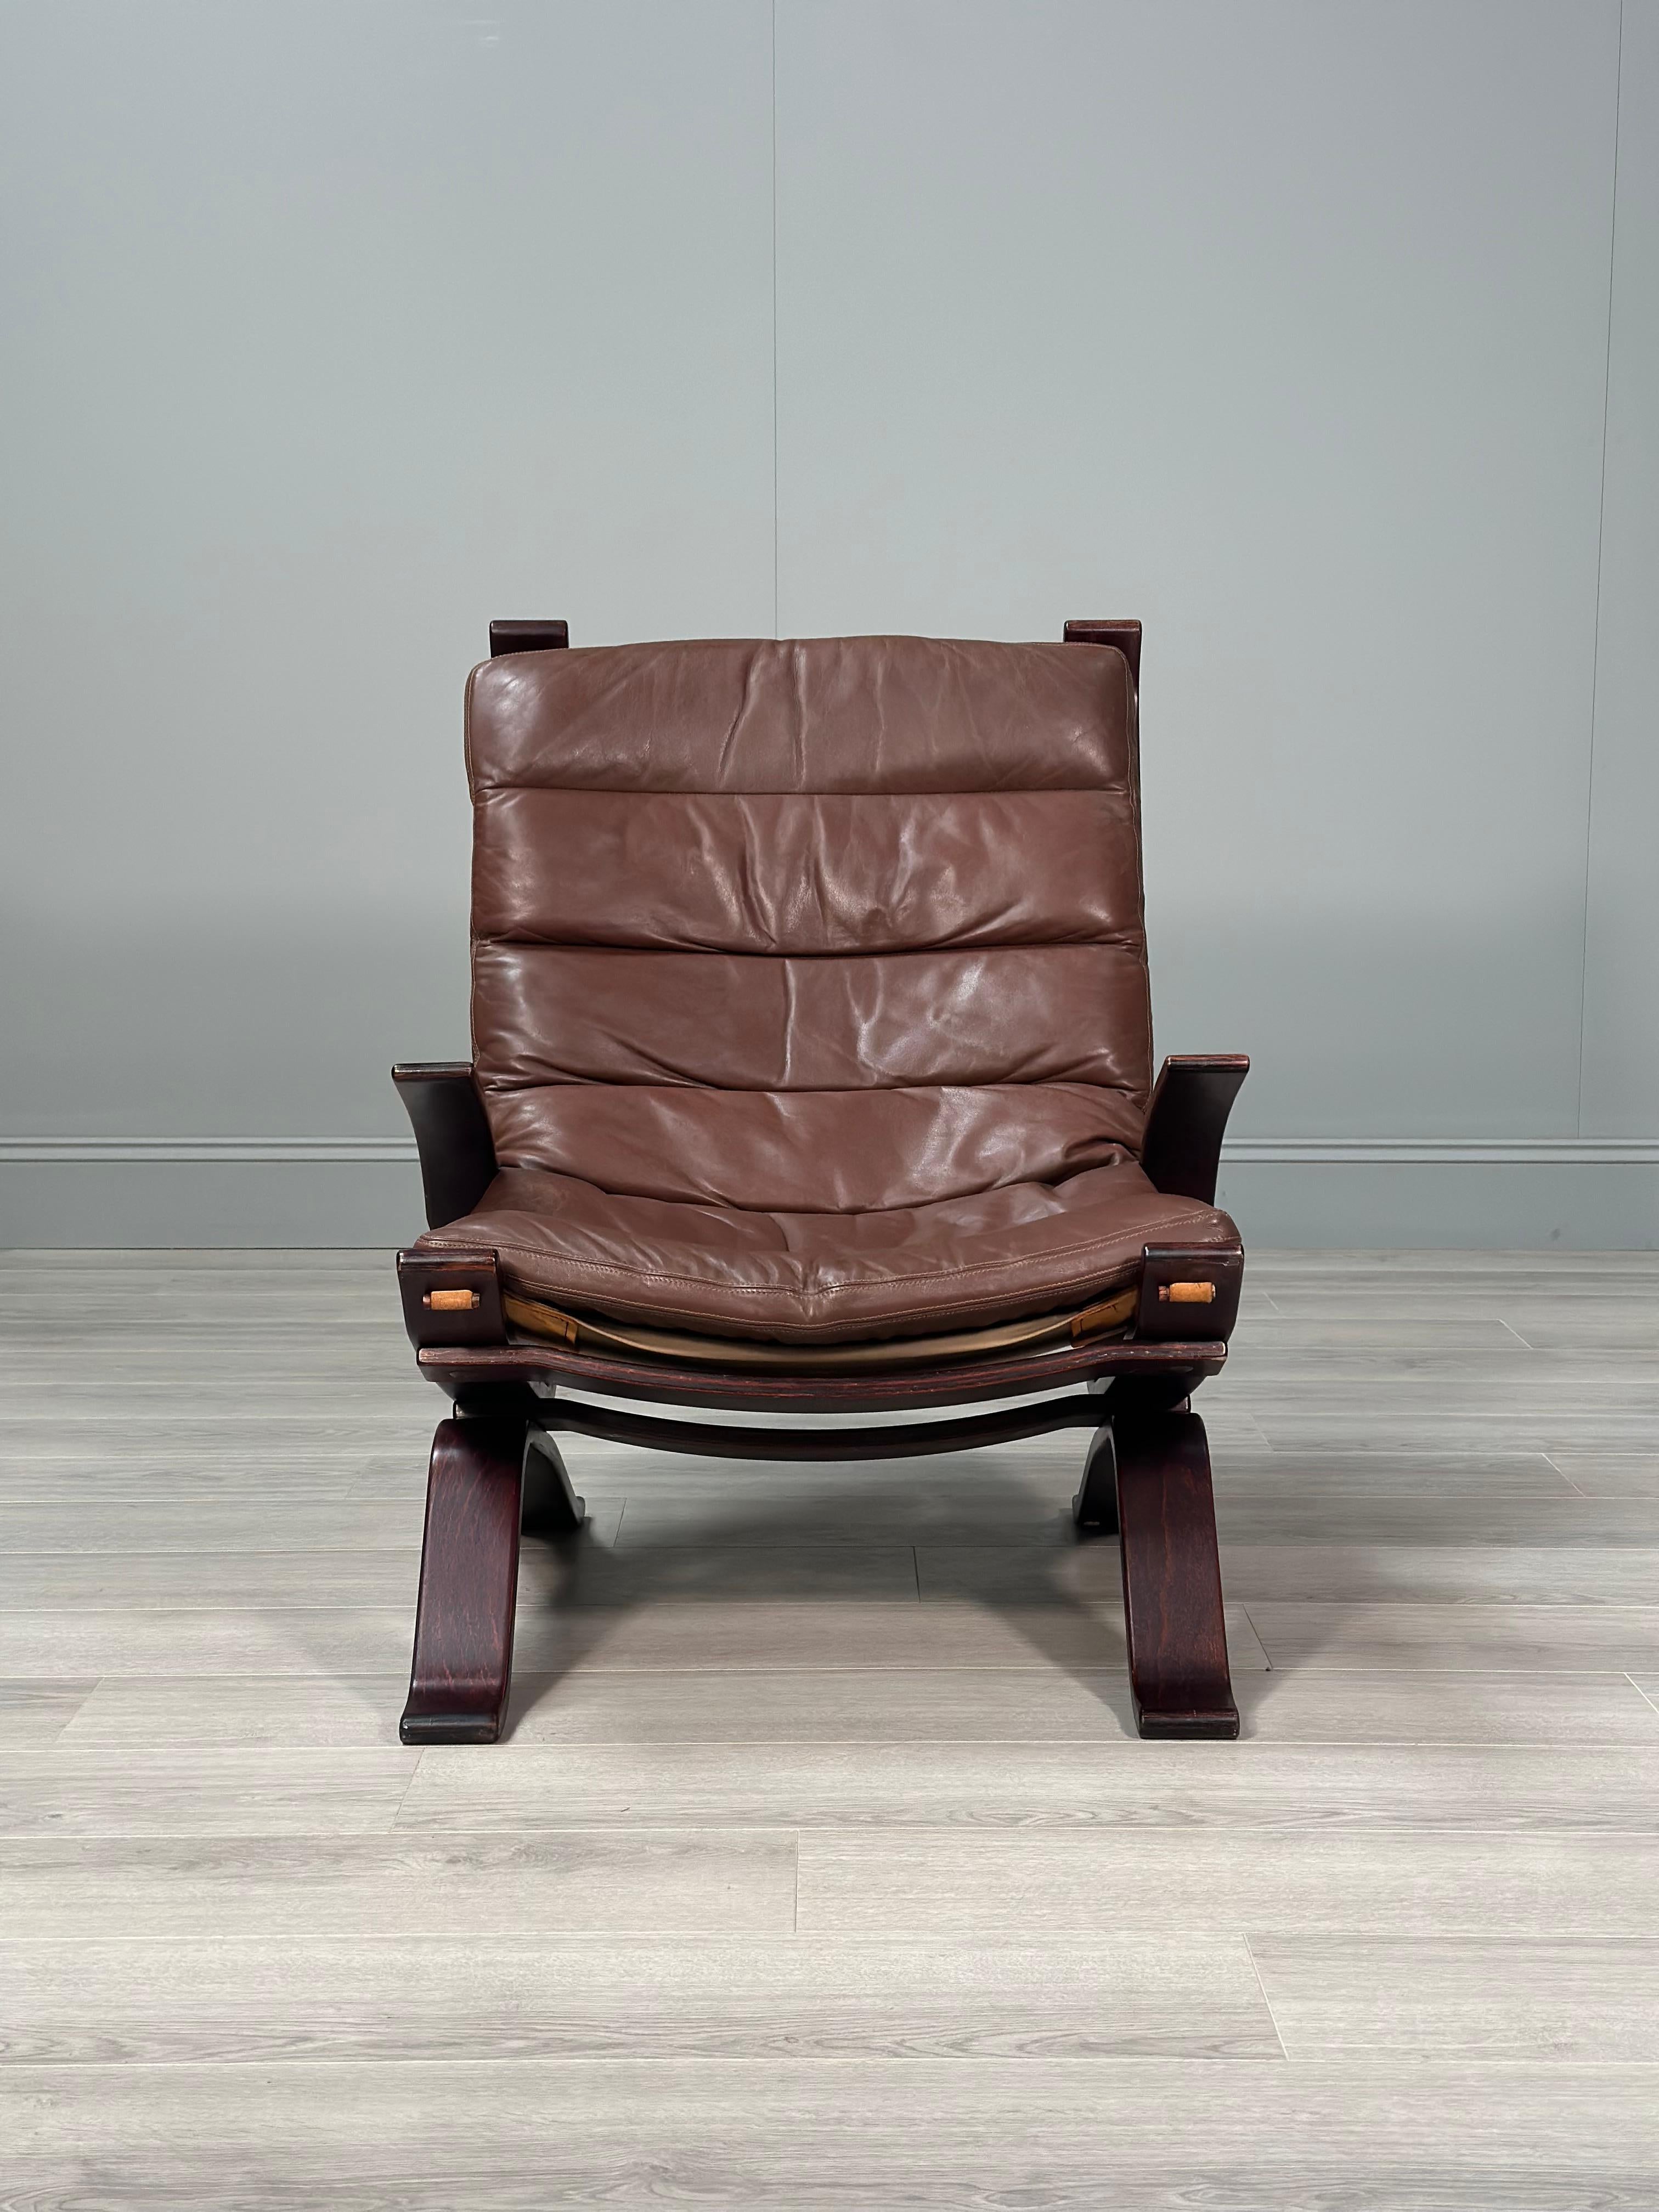 The ‘Focus’ Armchair by Bramin of Denmark, leather and bent wood rosewood frame and dates to the 1970’s. The chair has a quality channelled and stitched leather seat and is in overall very good condition, a fully original example with original